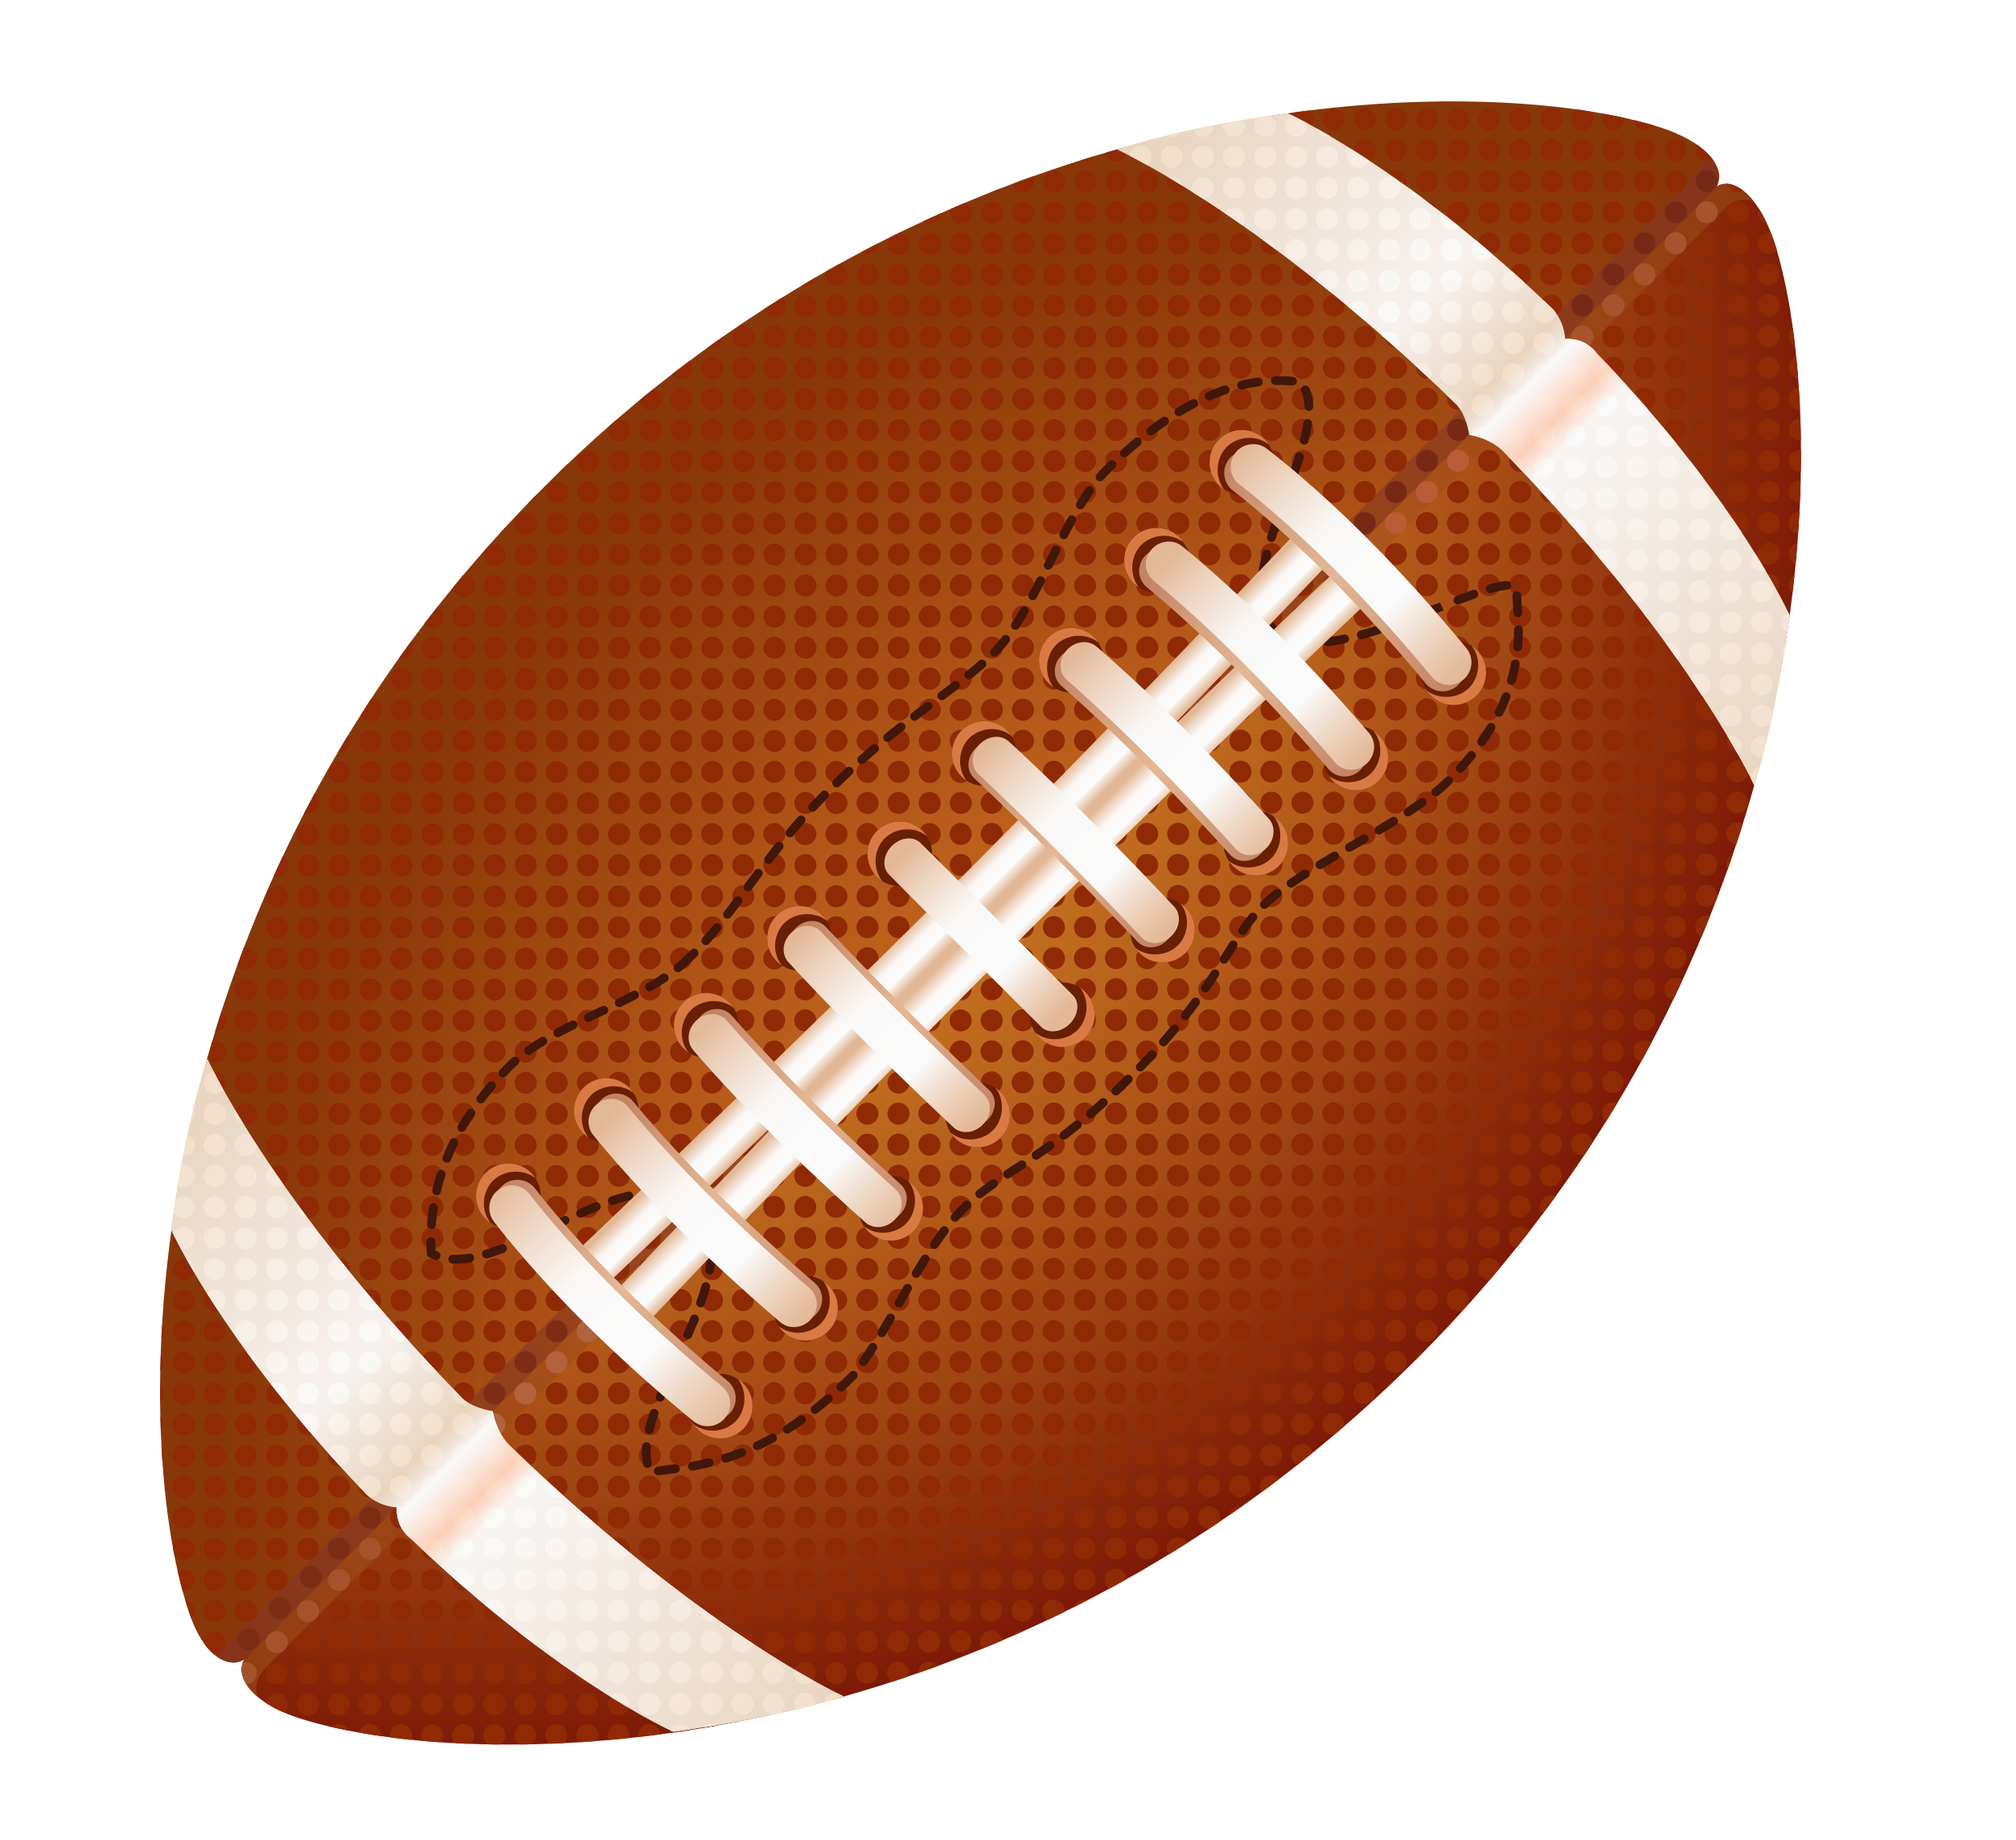 American Football Ball Png Clipart Picture Gallery Yopriceville High Quality Images And Transparent Png Free Clipart